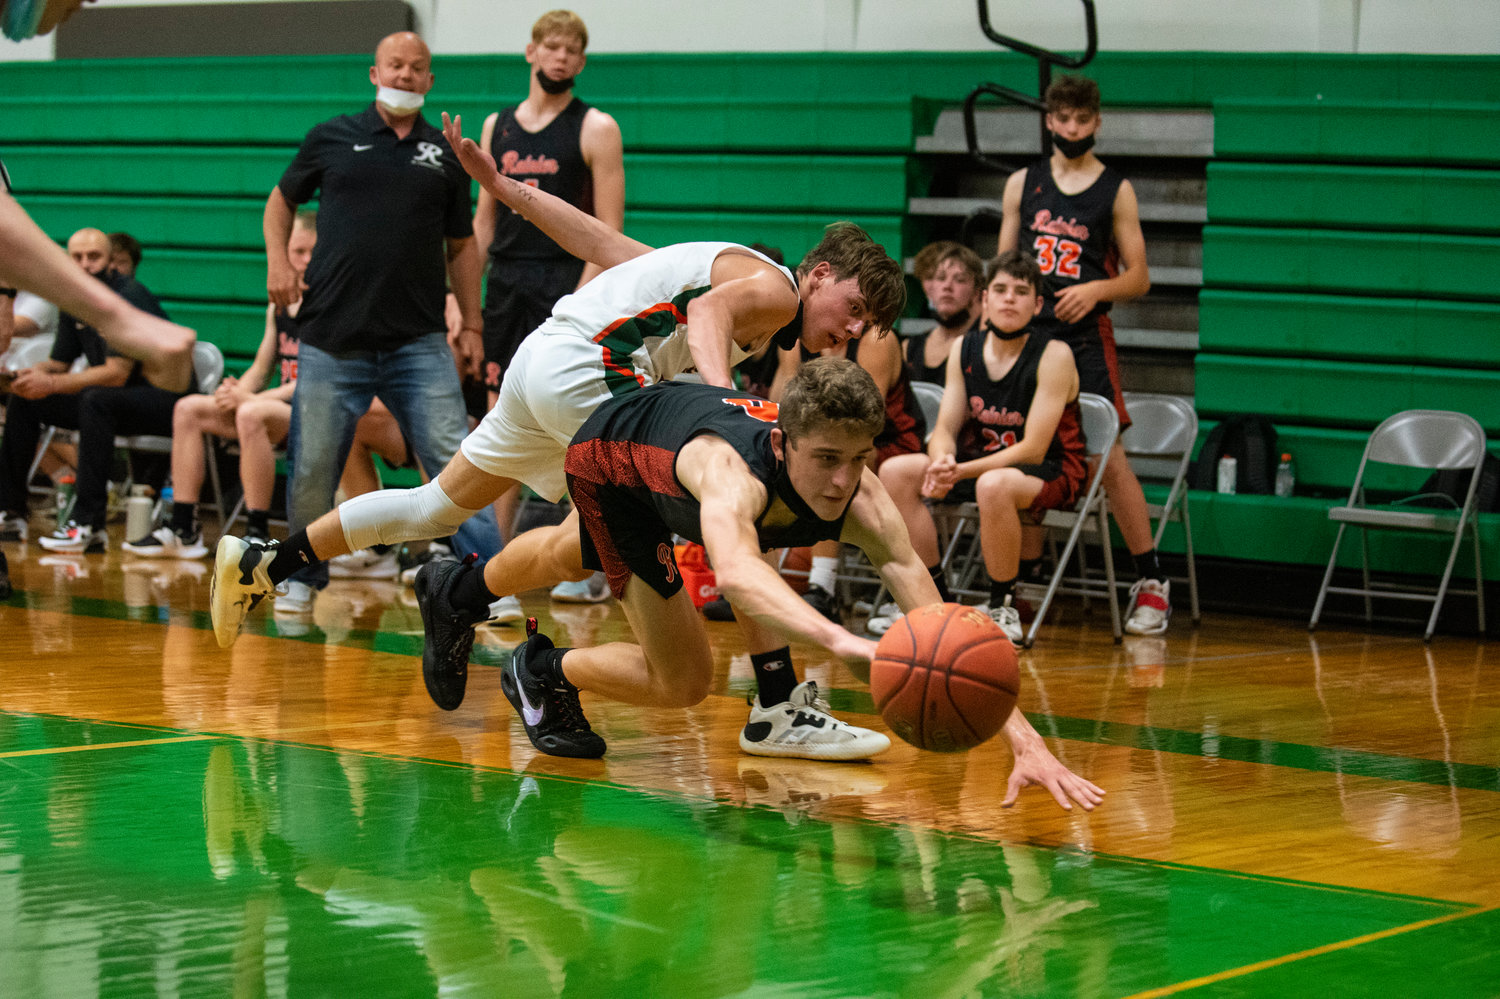 Rainier's Ian Sprouffske dives for a loose ball with MWP's Layten Collette behind him.